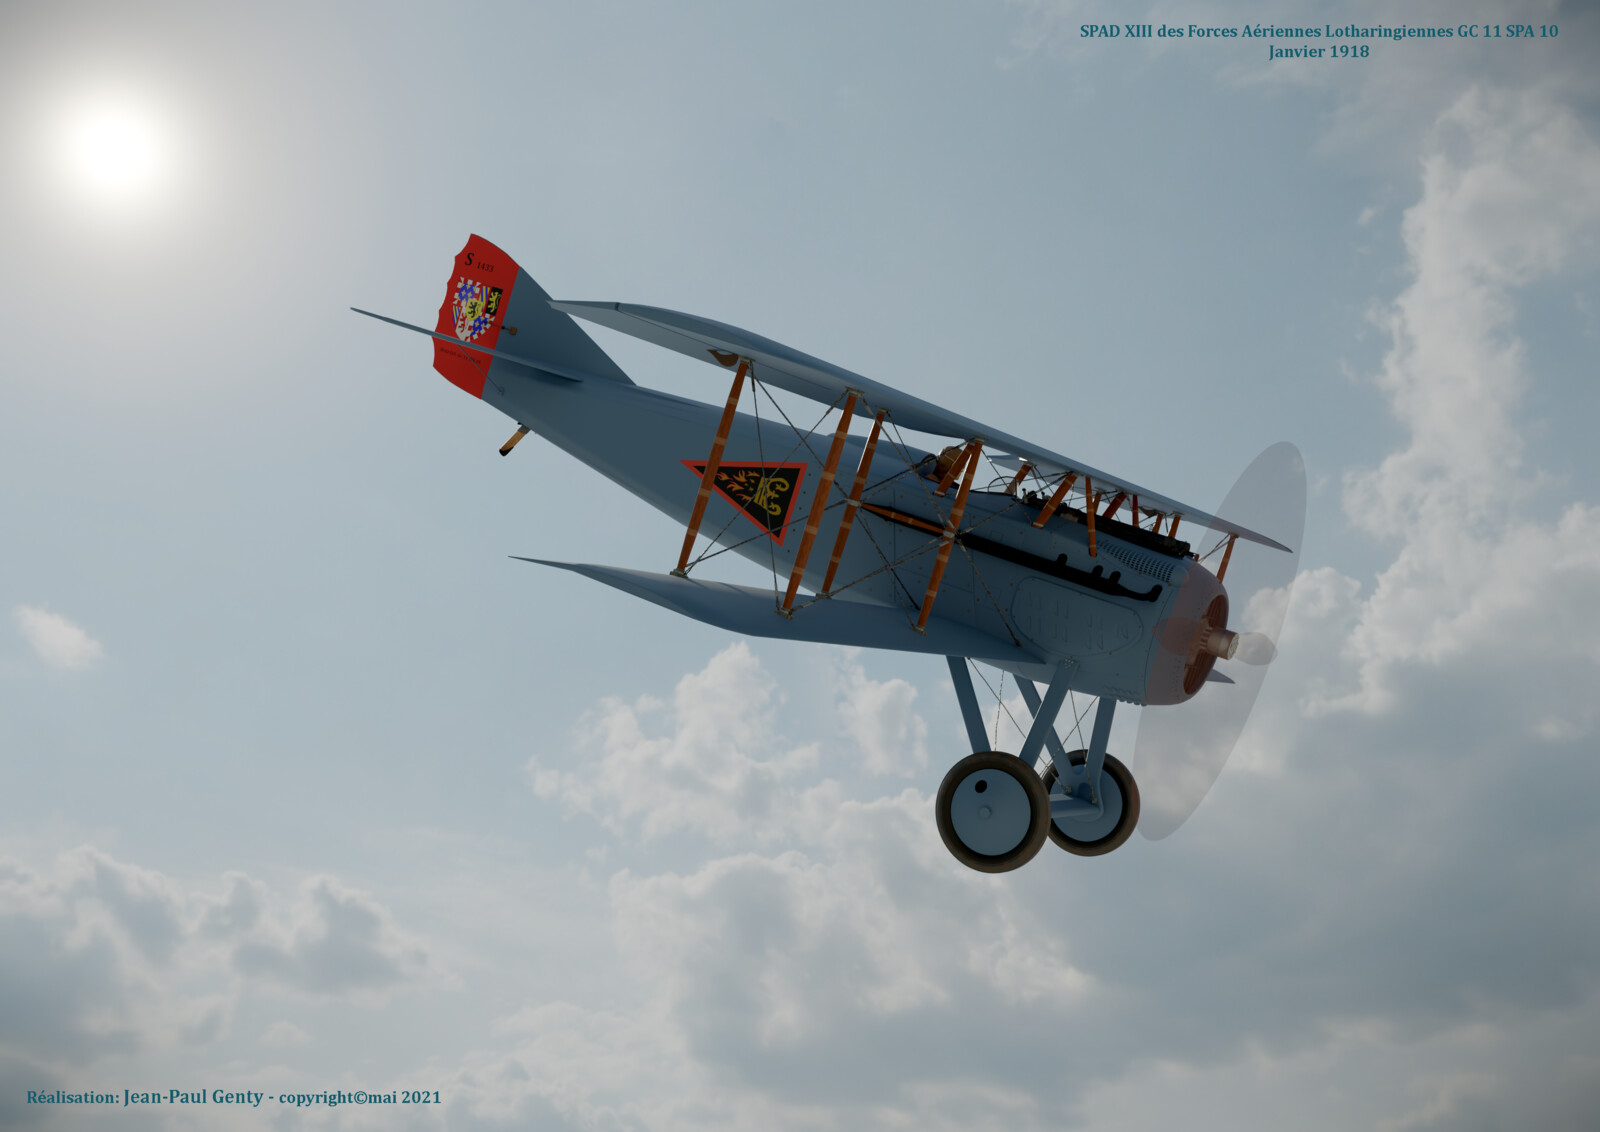 SPAD XIII Forces Aèriennes Lotharingiennes GC 11 SPA 10 - Janvier 1918 - Escadron de chasse de jour
SPAD XIII of the Lotharingian air forces - Fighter squadron -SPA 10 - January 1918
Made with Blender 2.92 